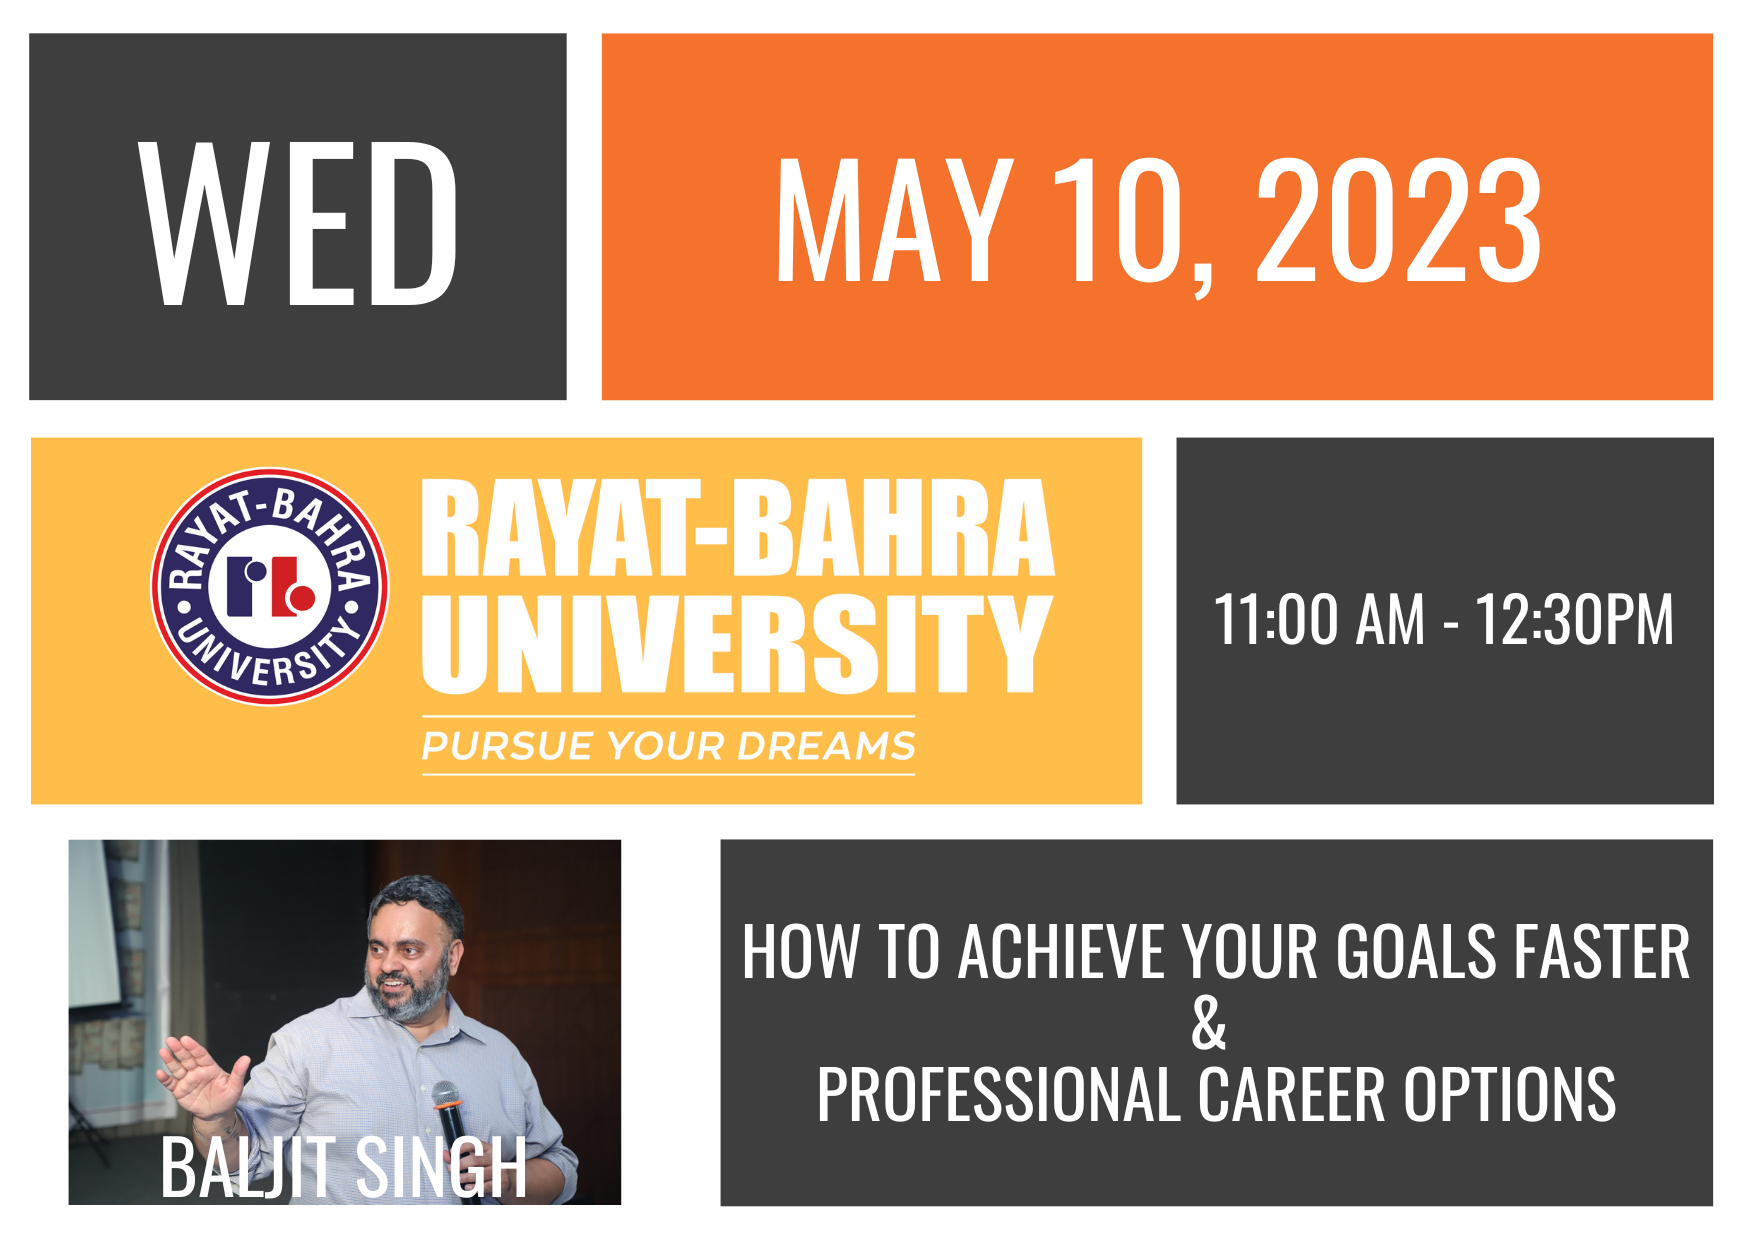 SPECIAL LECTURE: HOW TO GET TO YOUR GOALS FASTER AND THE PROFESSIONAL CAREER OPTIONS FOR RAYAT-BAHRA STUDENTS